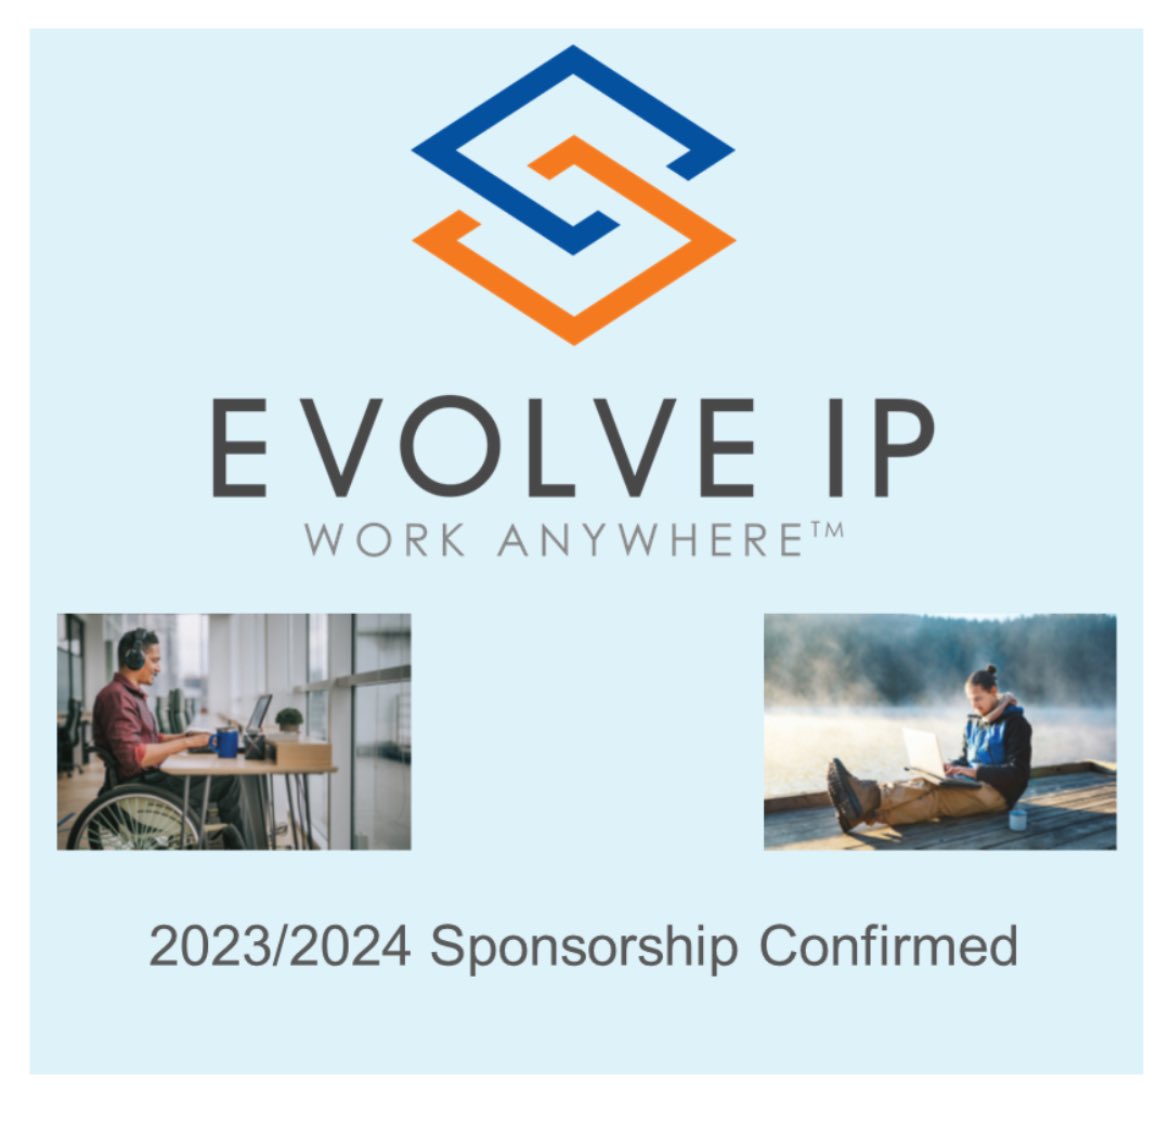 Excited to announce my next sponsor for the 23/24 season Evolve IP. @EvolveIP_Europe 

Evolve IP is a vertical specialist; supporting large hoteliers, automotive specialists, healthcare providers, and more.

Please go check out their work.